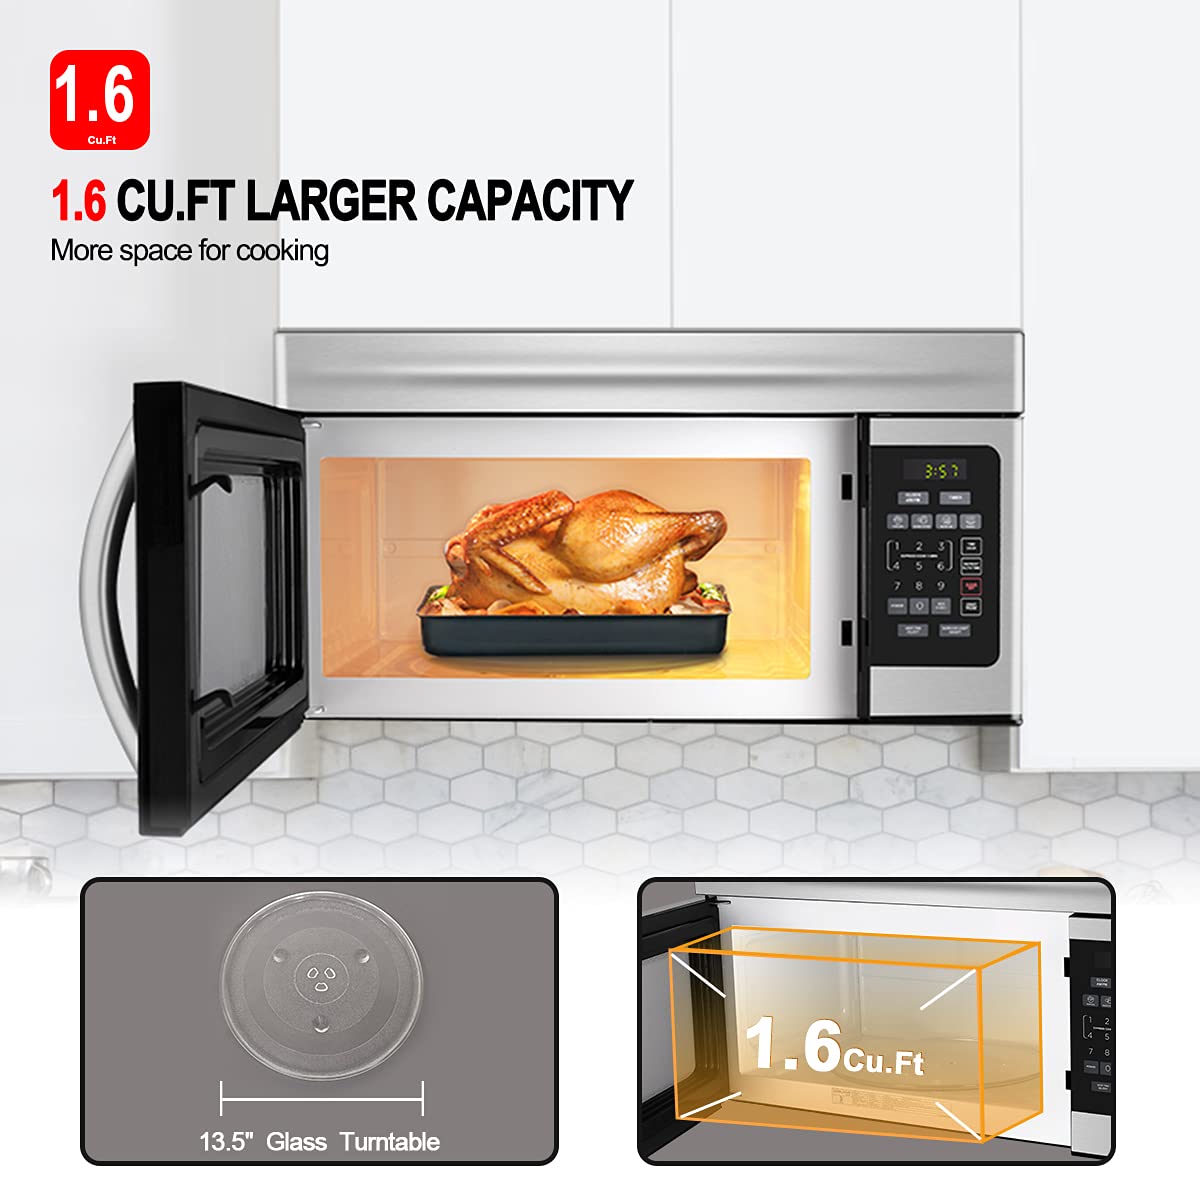 30 Inch Over-the-Range Microwave Oven, GASLAND Chef OTR1603S Over The Stove Microwave Oven with 1.6 Cu. Ft. Capacity, 1000 Watts, 300 CFM in Stainless Steel, 13" Glass Turntable, 120V, Easy Clean